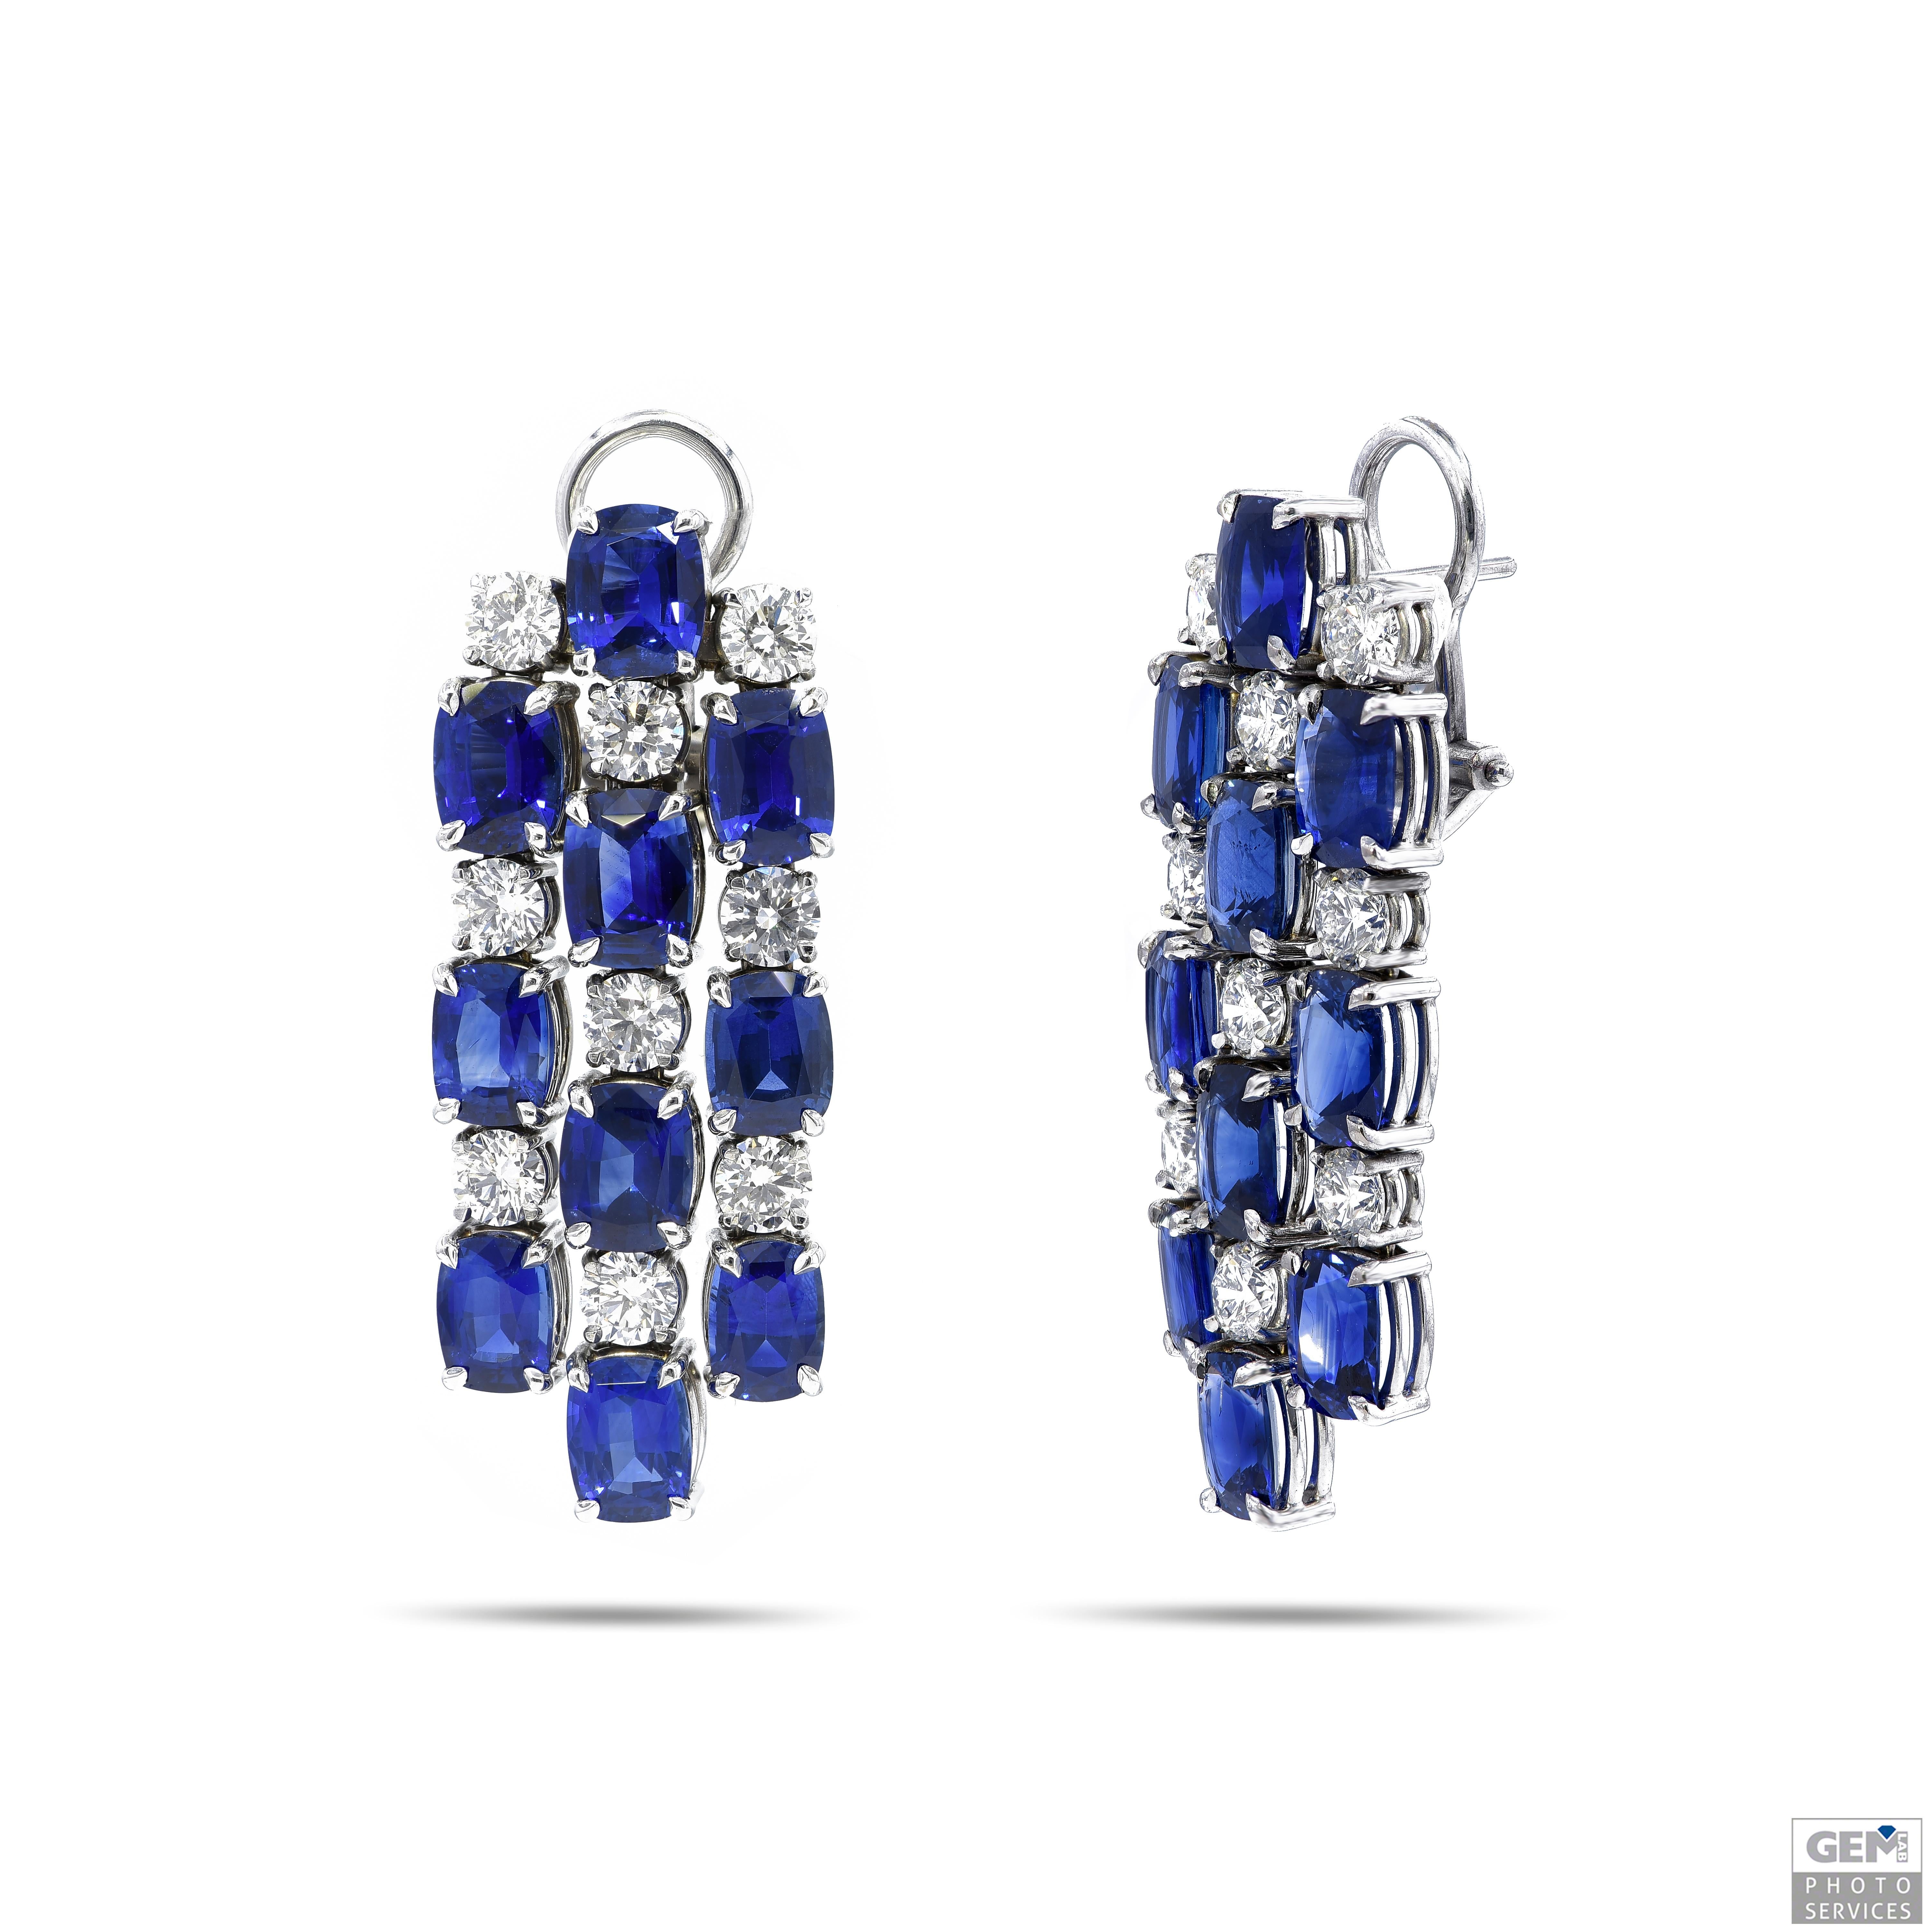 18kt White Gold Bracelet Set Necklace Earring Sapphire Diamonds  CGL Certified.

Necklace:

Most beautiful Sapphire and diamond necklace (Also available to be bought as a set with matching bracelet and earrings)
Sapphires: 42 Vivid blue, Cushion